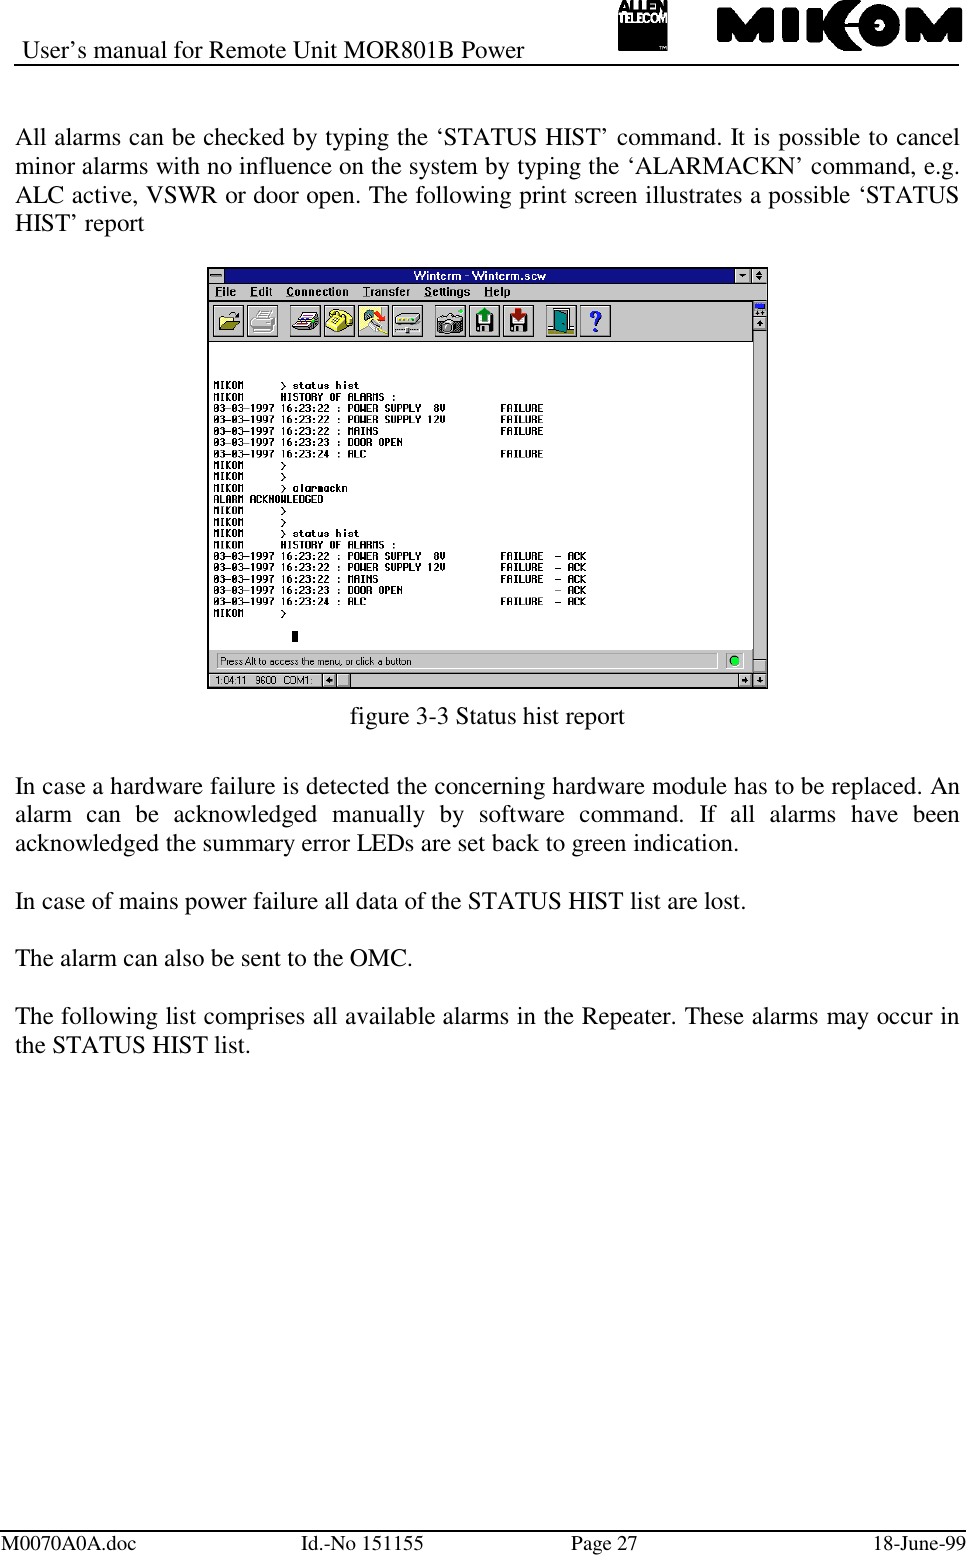 User’s manual for Remote Unit MOR801B PowerM0070A0A.doc Id.-No 151155 Page 27 18-June-99All alarms can be checked by typing the ‘STATUS HIST’ command. It is possible to cancelminor alarms with no influence on the system by typing the ‘ALARMACKN’ command, e.g.ALC active, VSWR or door open. The following print screen illustrates a possible ‘STATUSHIST’ reportfigure 3-3 Status hist reportIn case a hardware failure is detected the concerning hardware module has to be replaced. Analarm can be acknowledged manually by software command. If all alarms have beenacknowledged the summary error LEDs are set back to green indication.In case of mains power failure all data of the STATUS HIST list are lost.The alarm can also be sent to the OMC.The following list comprises all available alarms in the Repeater. These alarms may occur inthe STATUS HIST list.